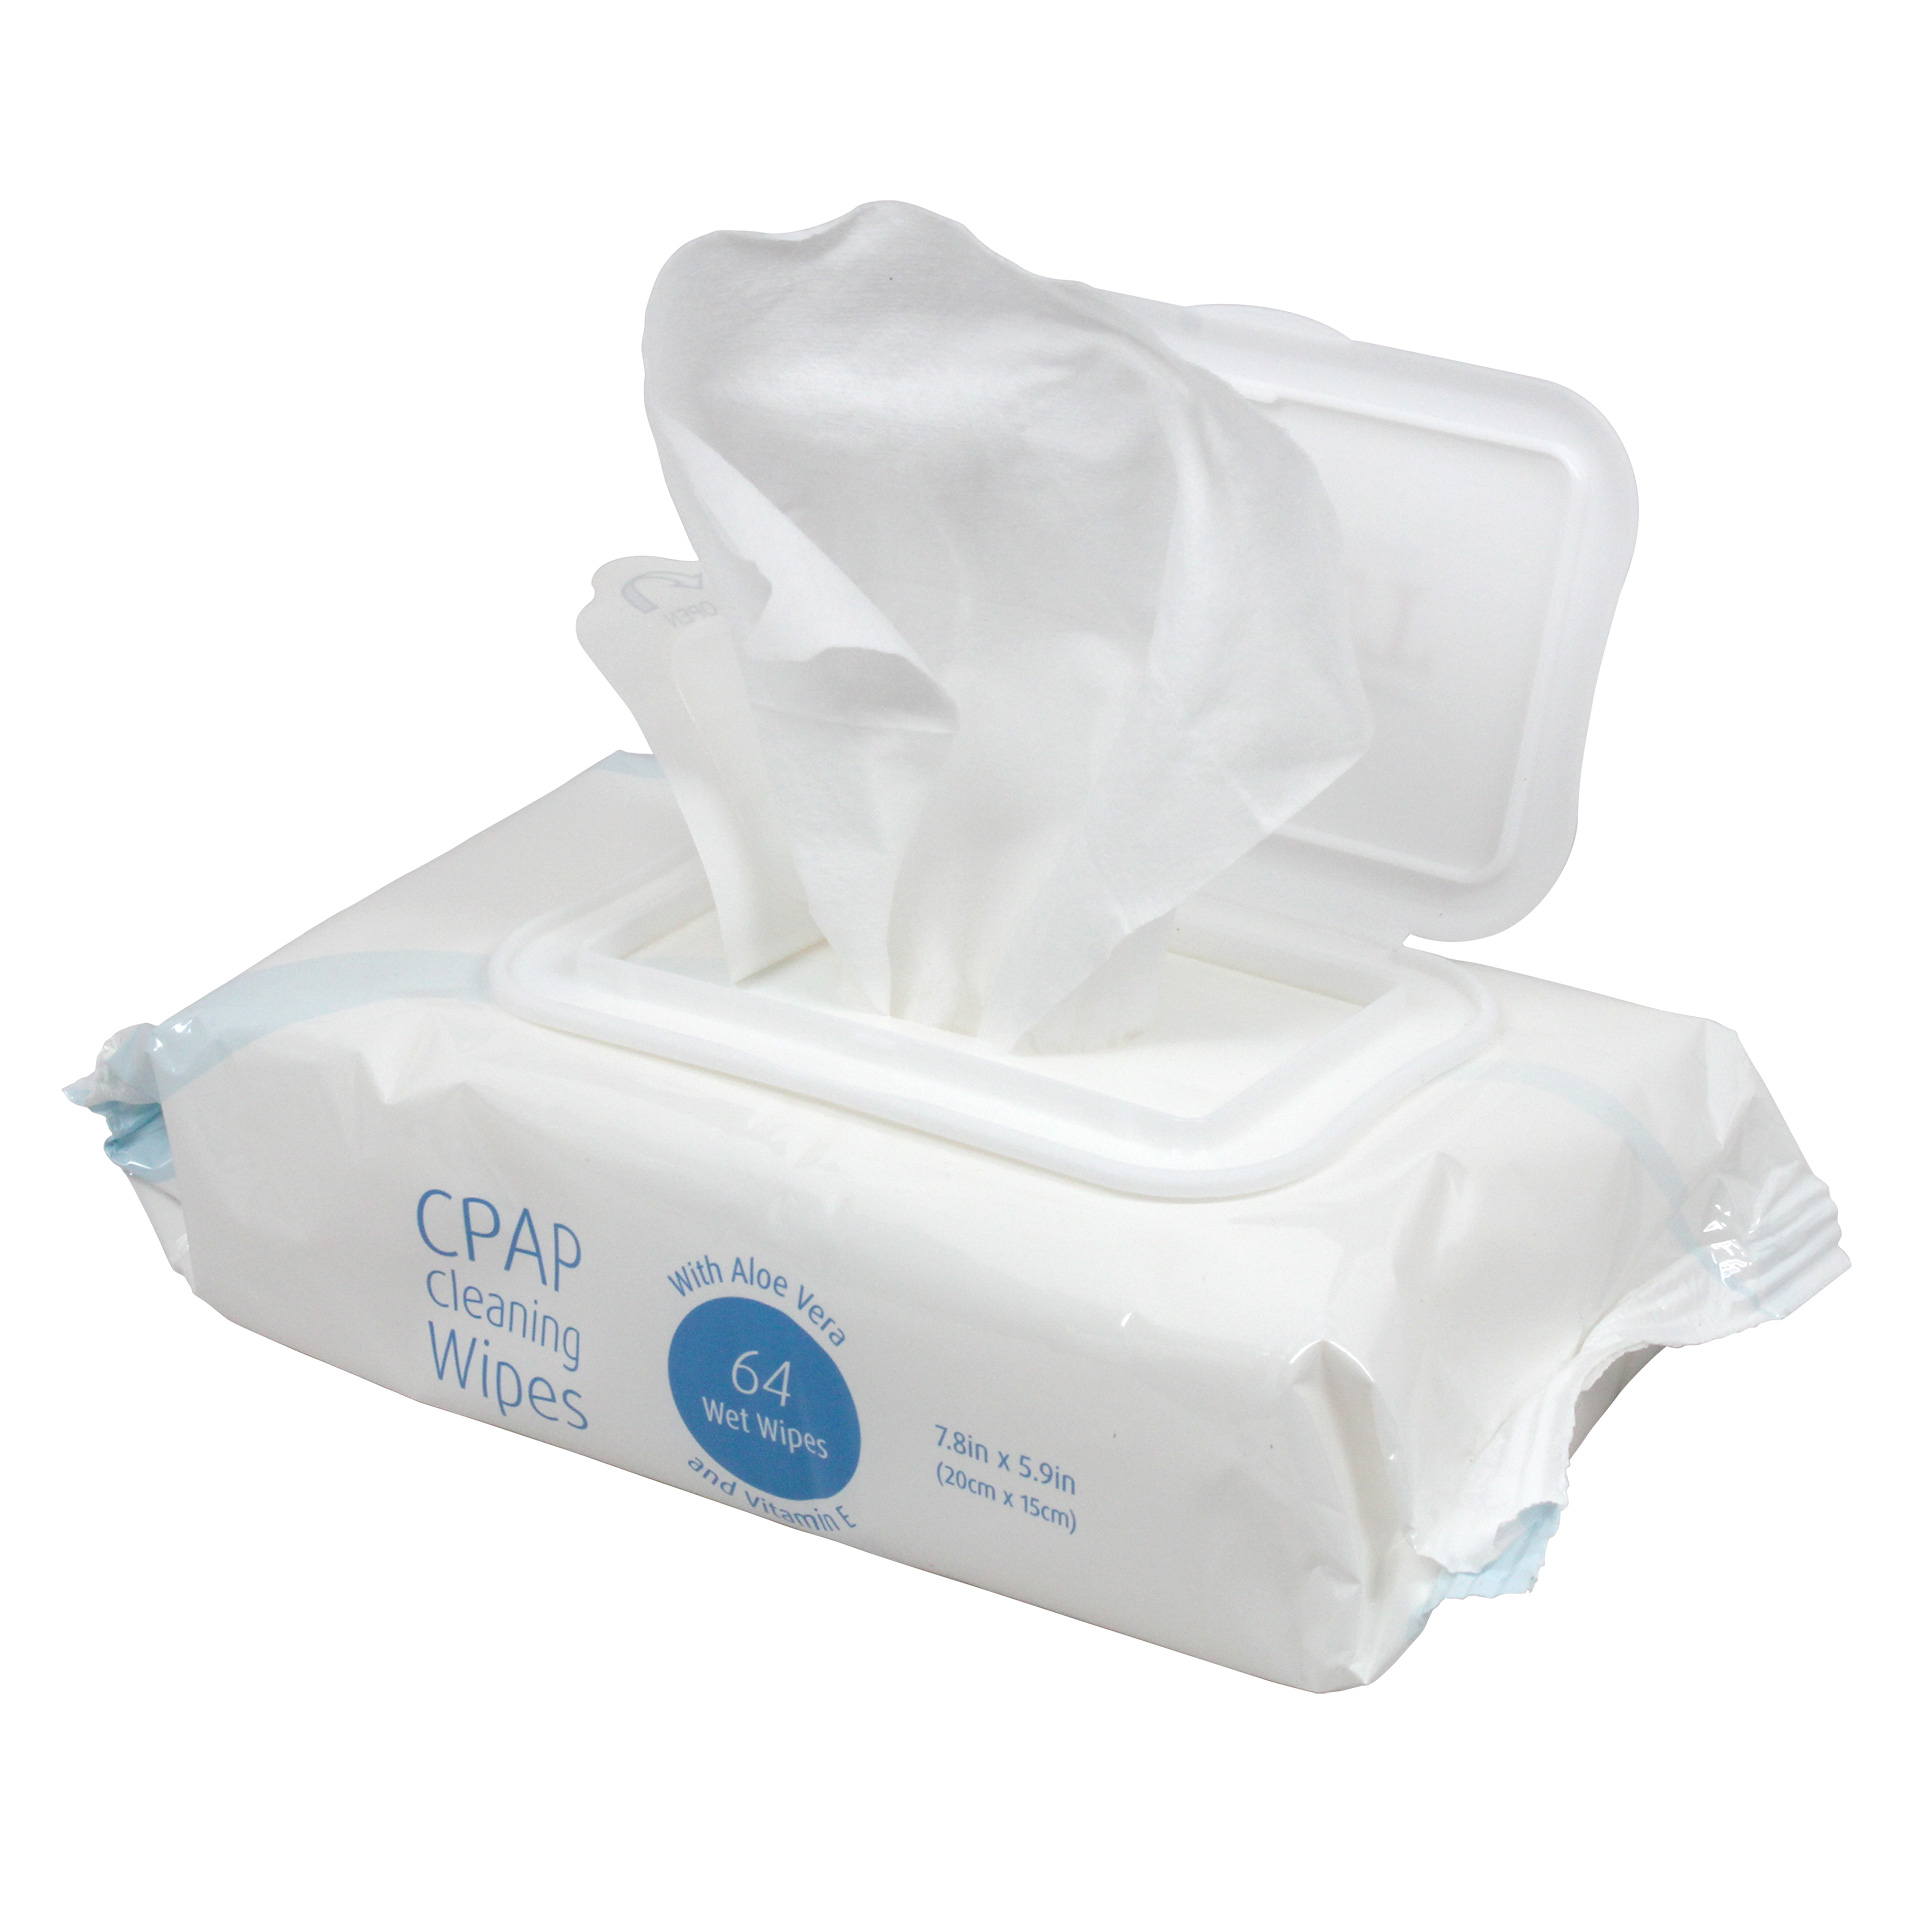 Sunset Unscented CPAP Wipes